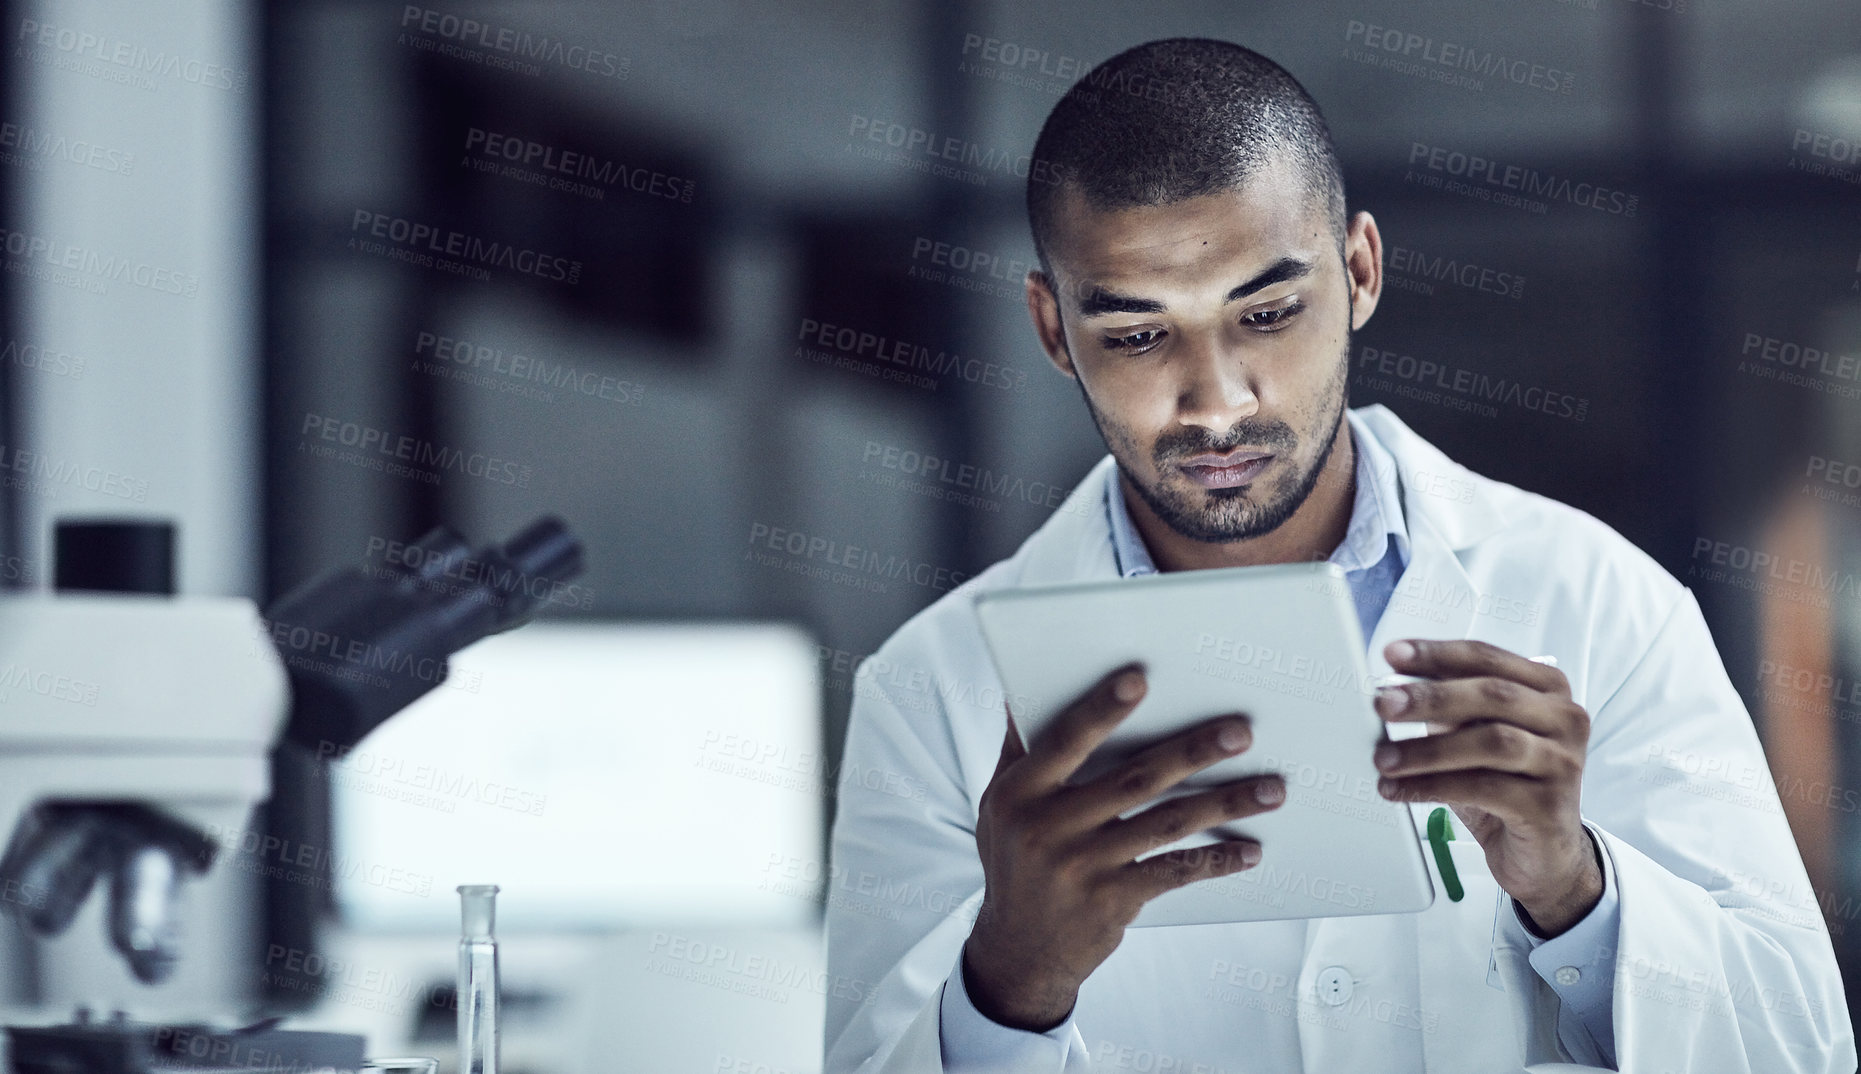 Buy stock photo Shot of a scientist recording his findings on a digital tablet